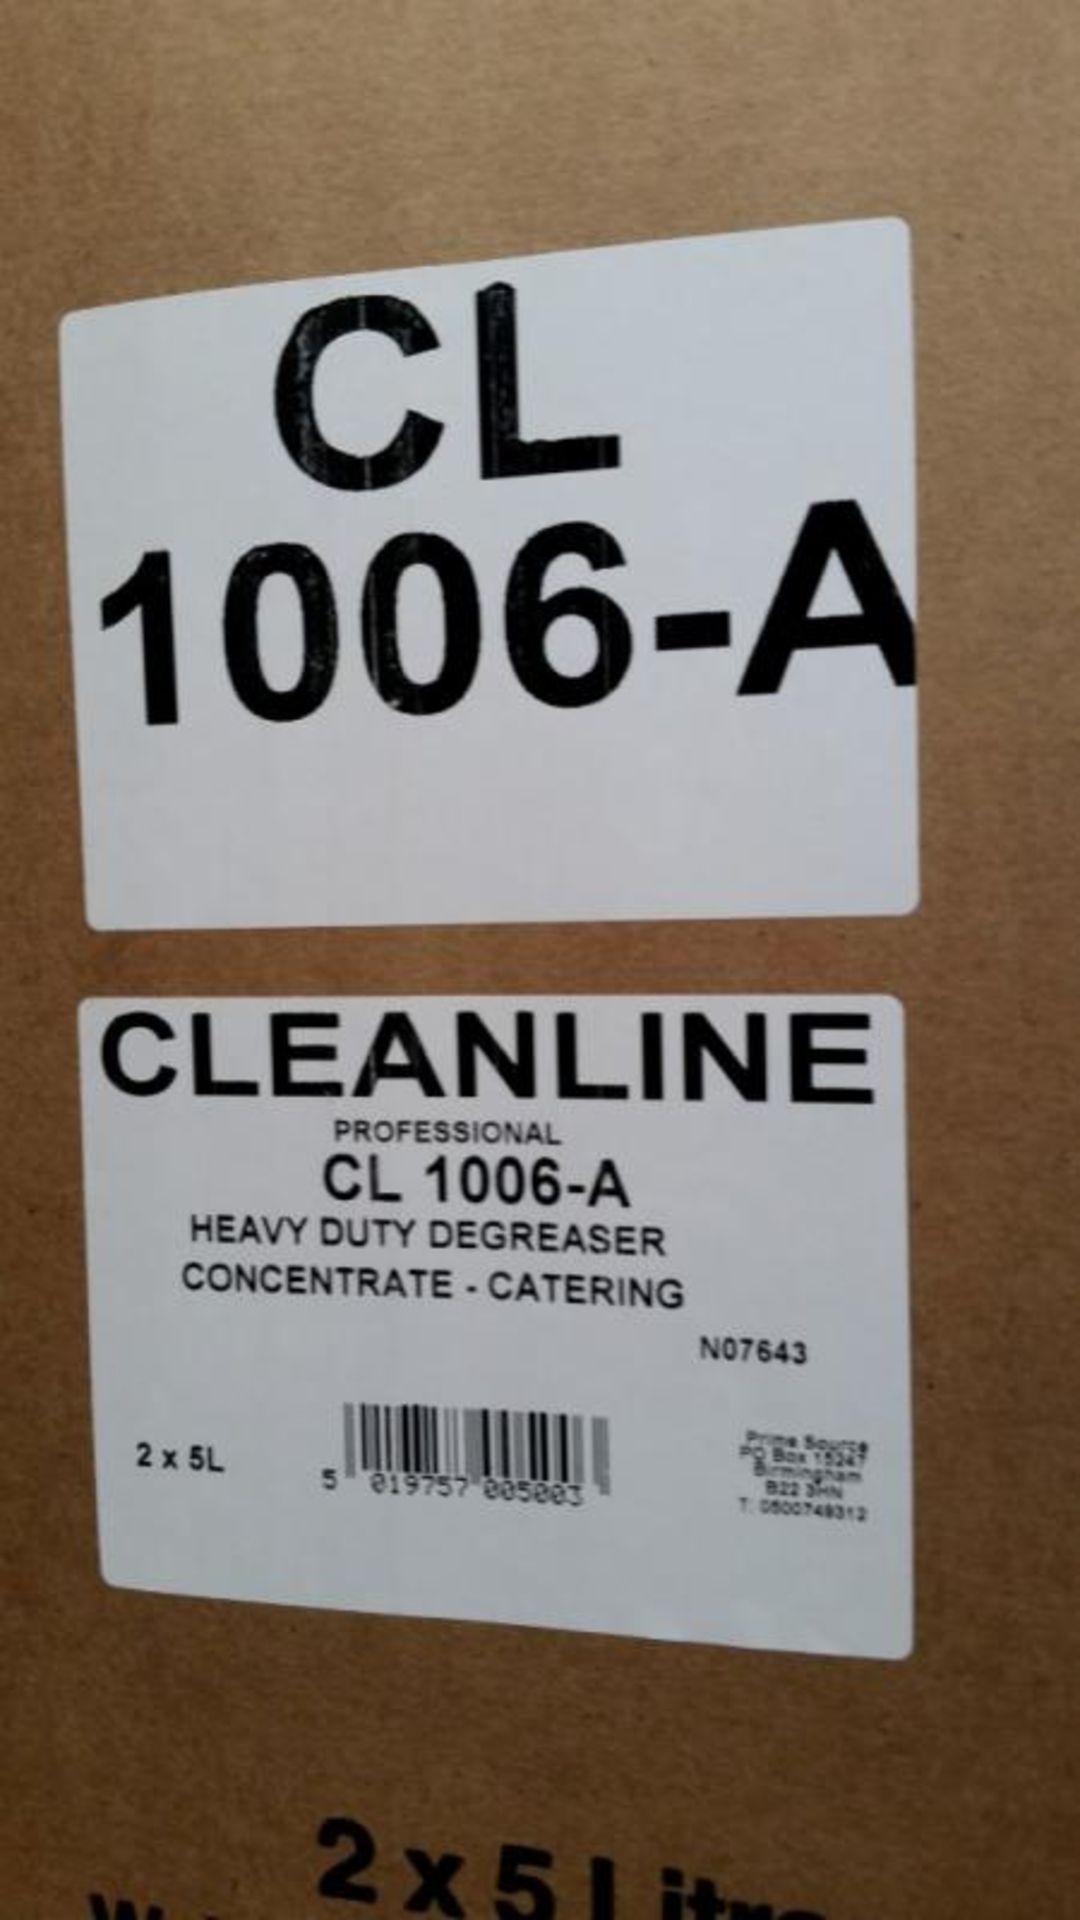 2 x Clean Line Professional 5 Litre Heavy Duty Degreaser Concentrate - Alkaline Cleaner & - Image 4 of 5